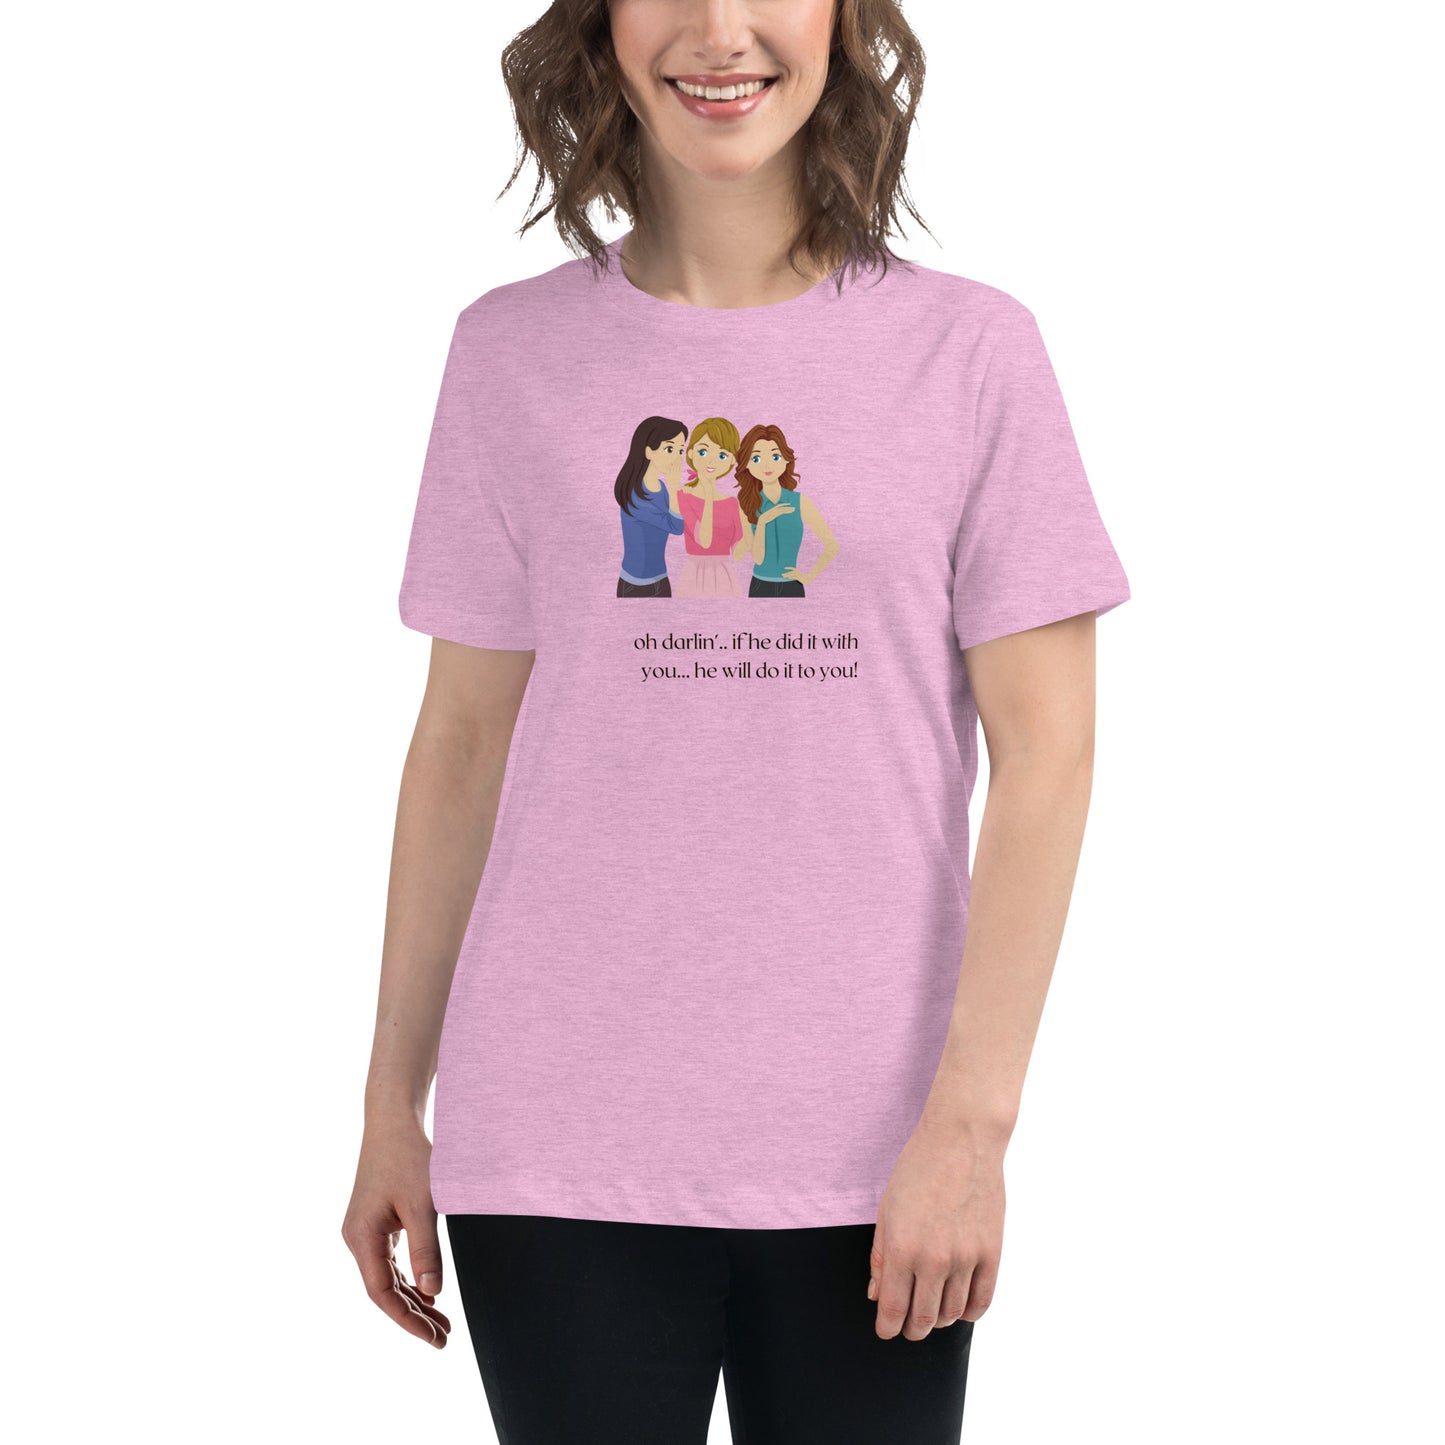 Women's Relaxed T-Shirt - If he Ladies - If He did it with You He'll Do it To You T-shirt Stylin' Spirit Heather Prism Lilac S 